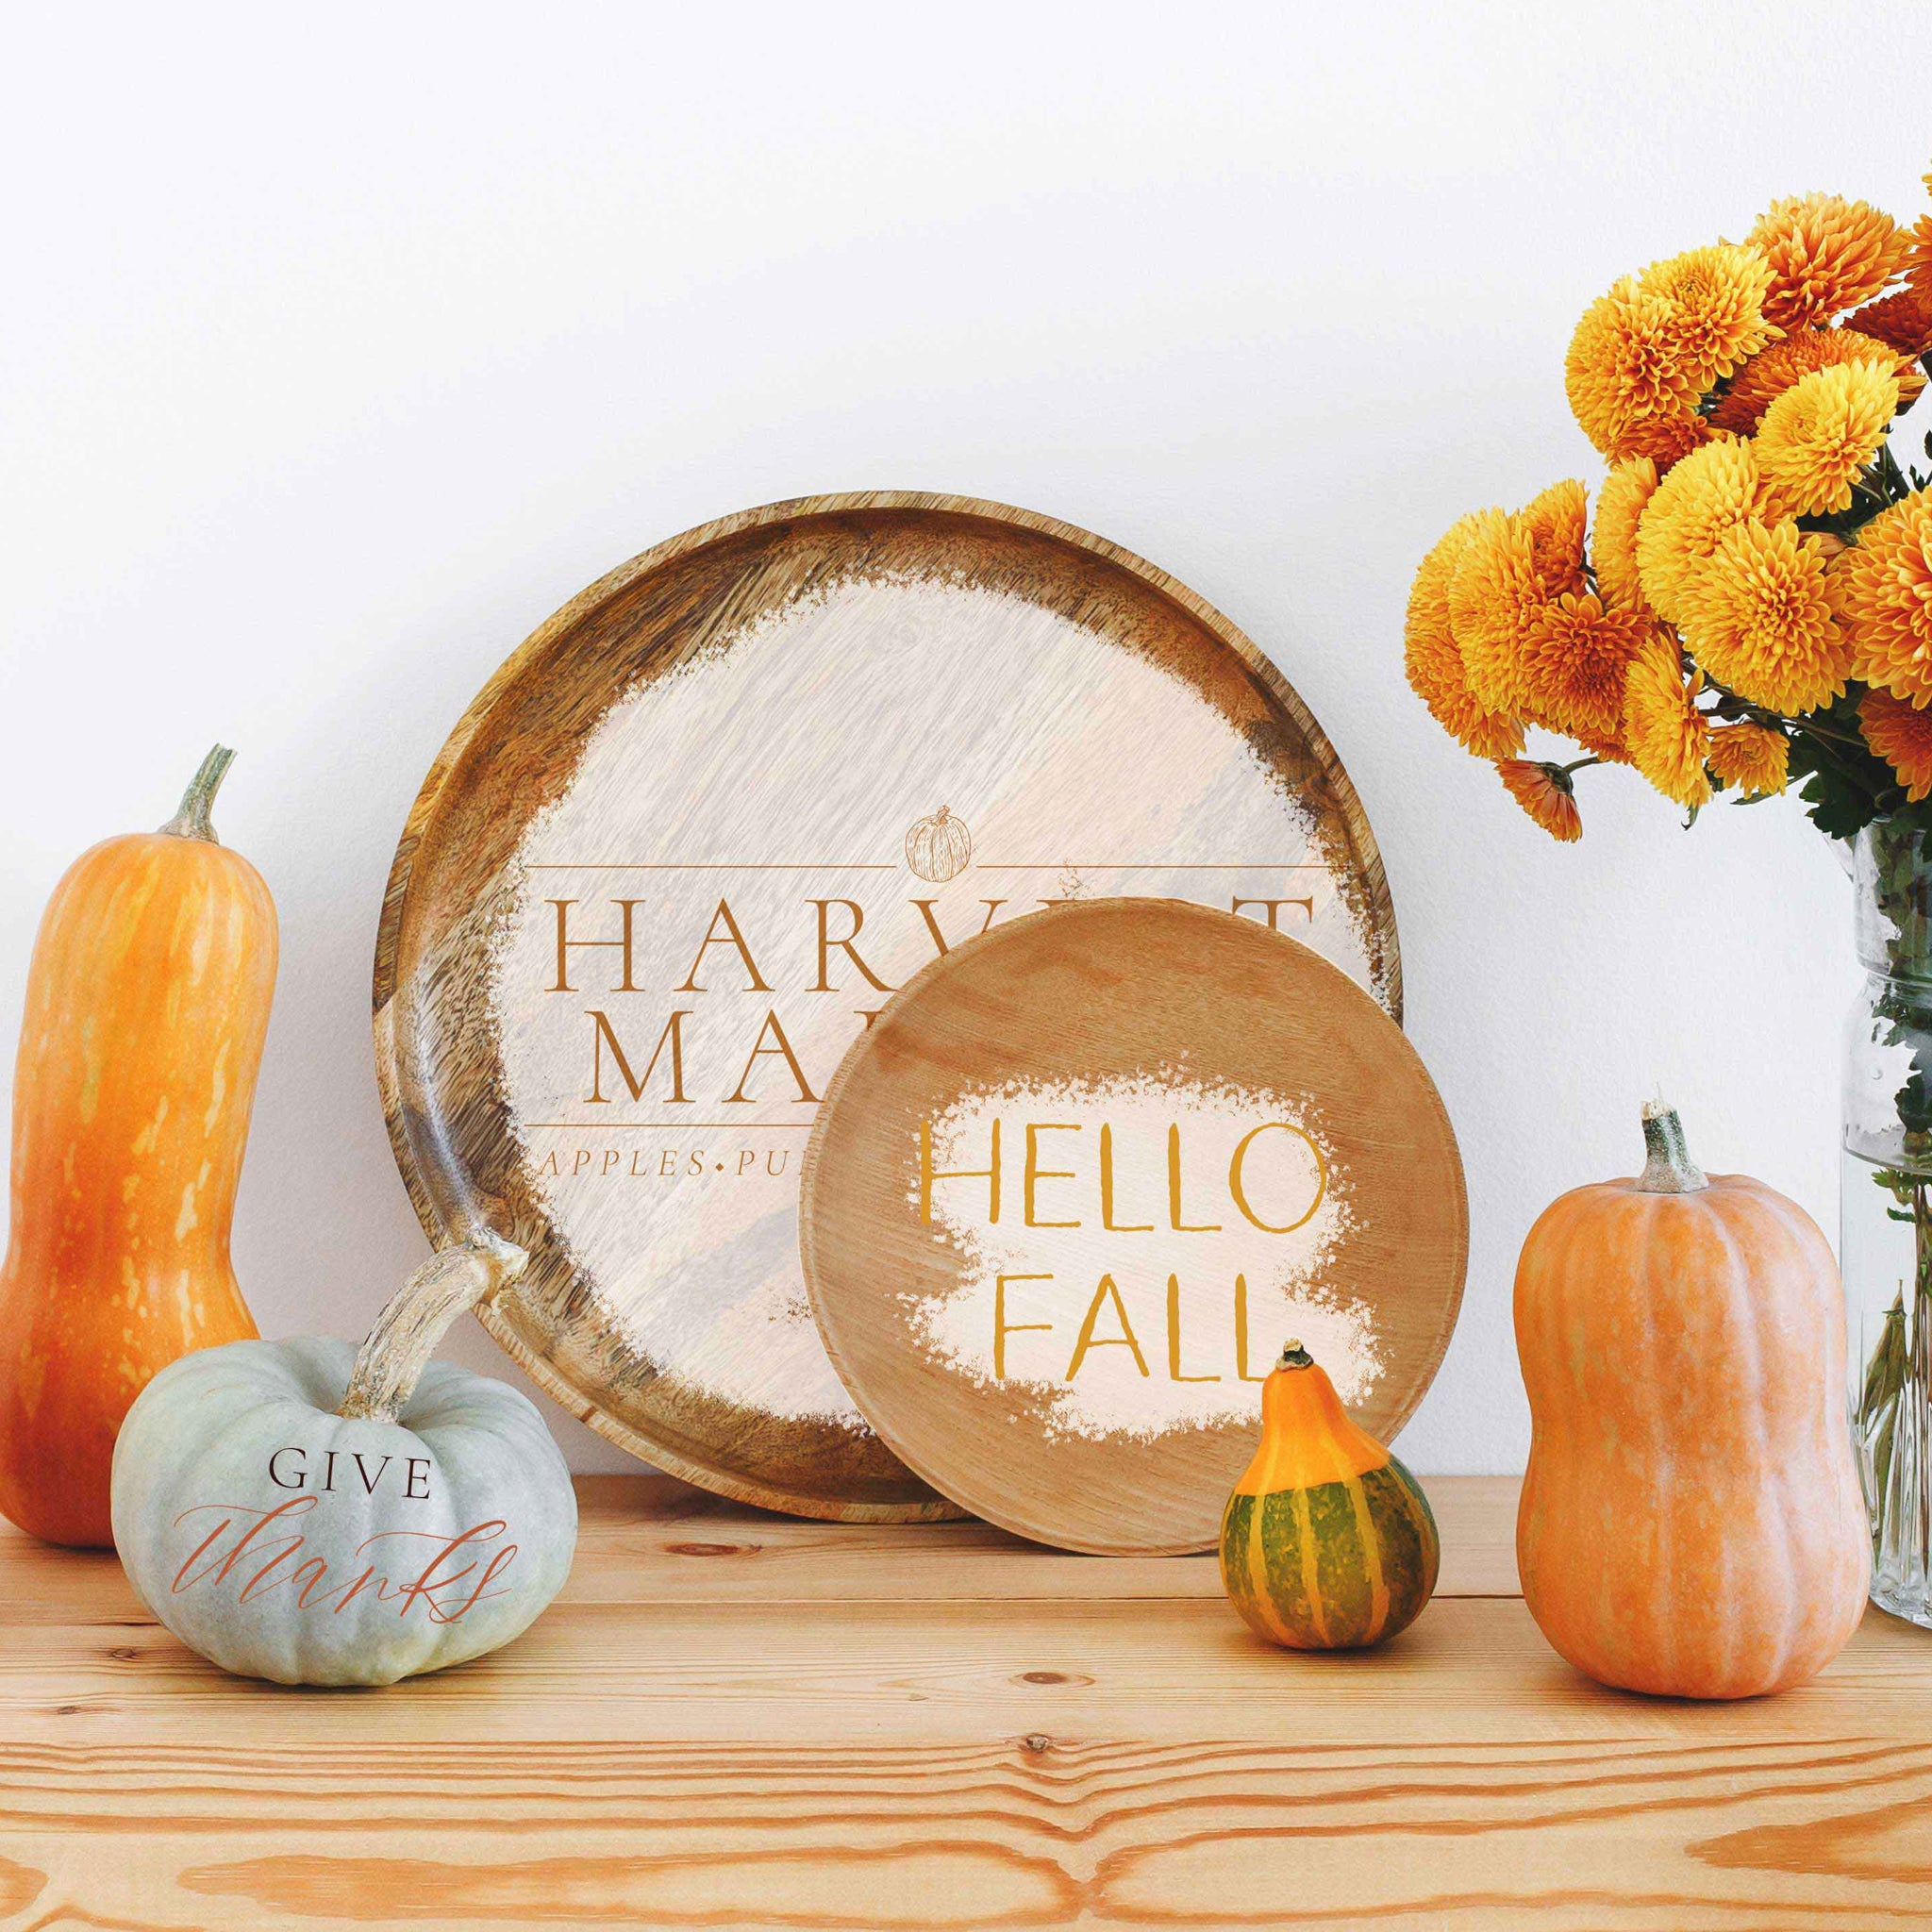 Wood plates, pumpkins, and gourds feature the Fall Festive small transfer on them.